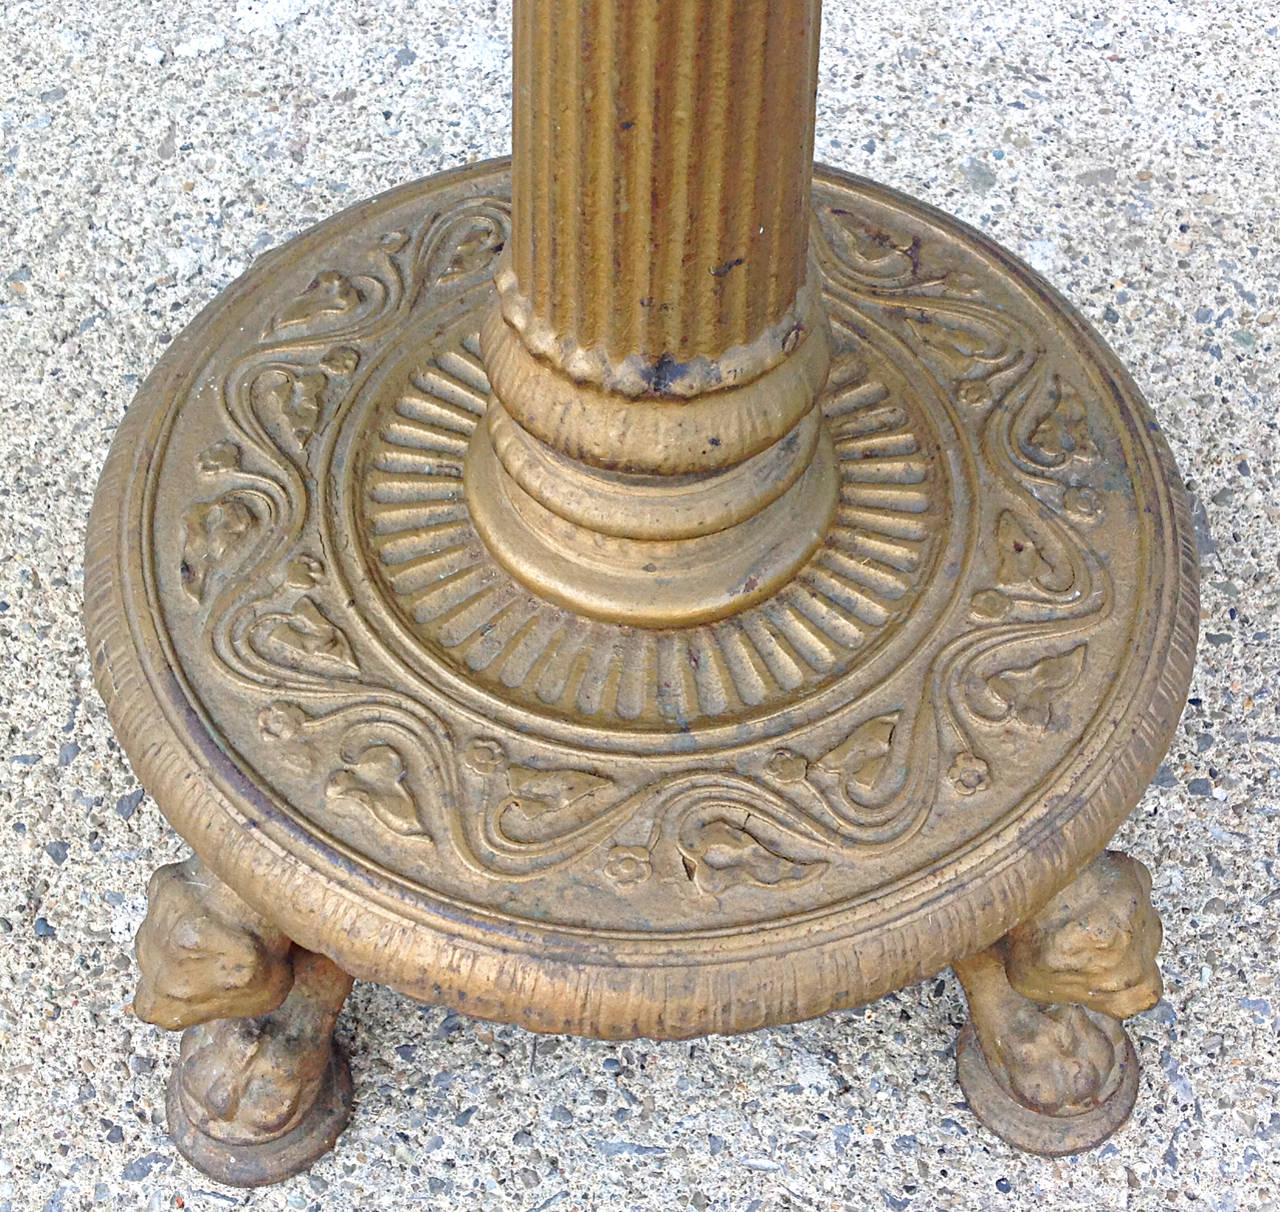 Late 19th century polychromed iron pedestal with paw feet, lion and dog heads. Intricate detail in casting.